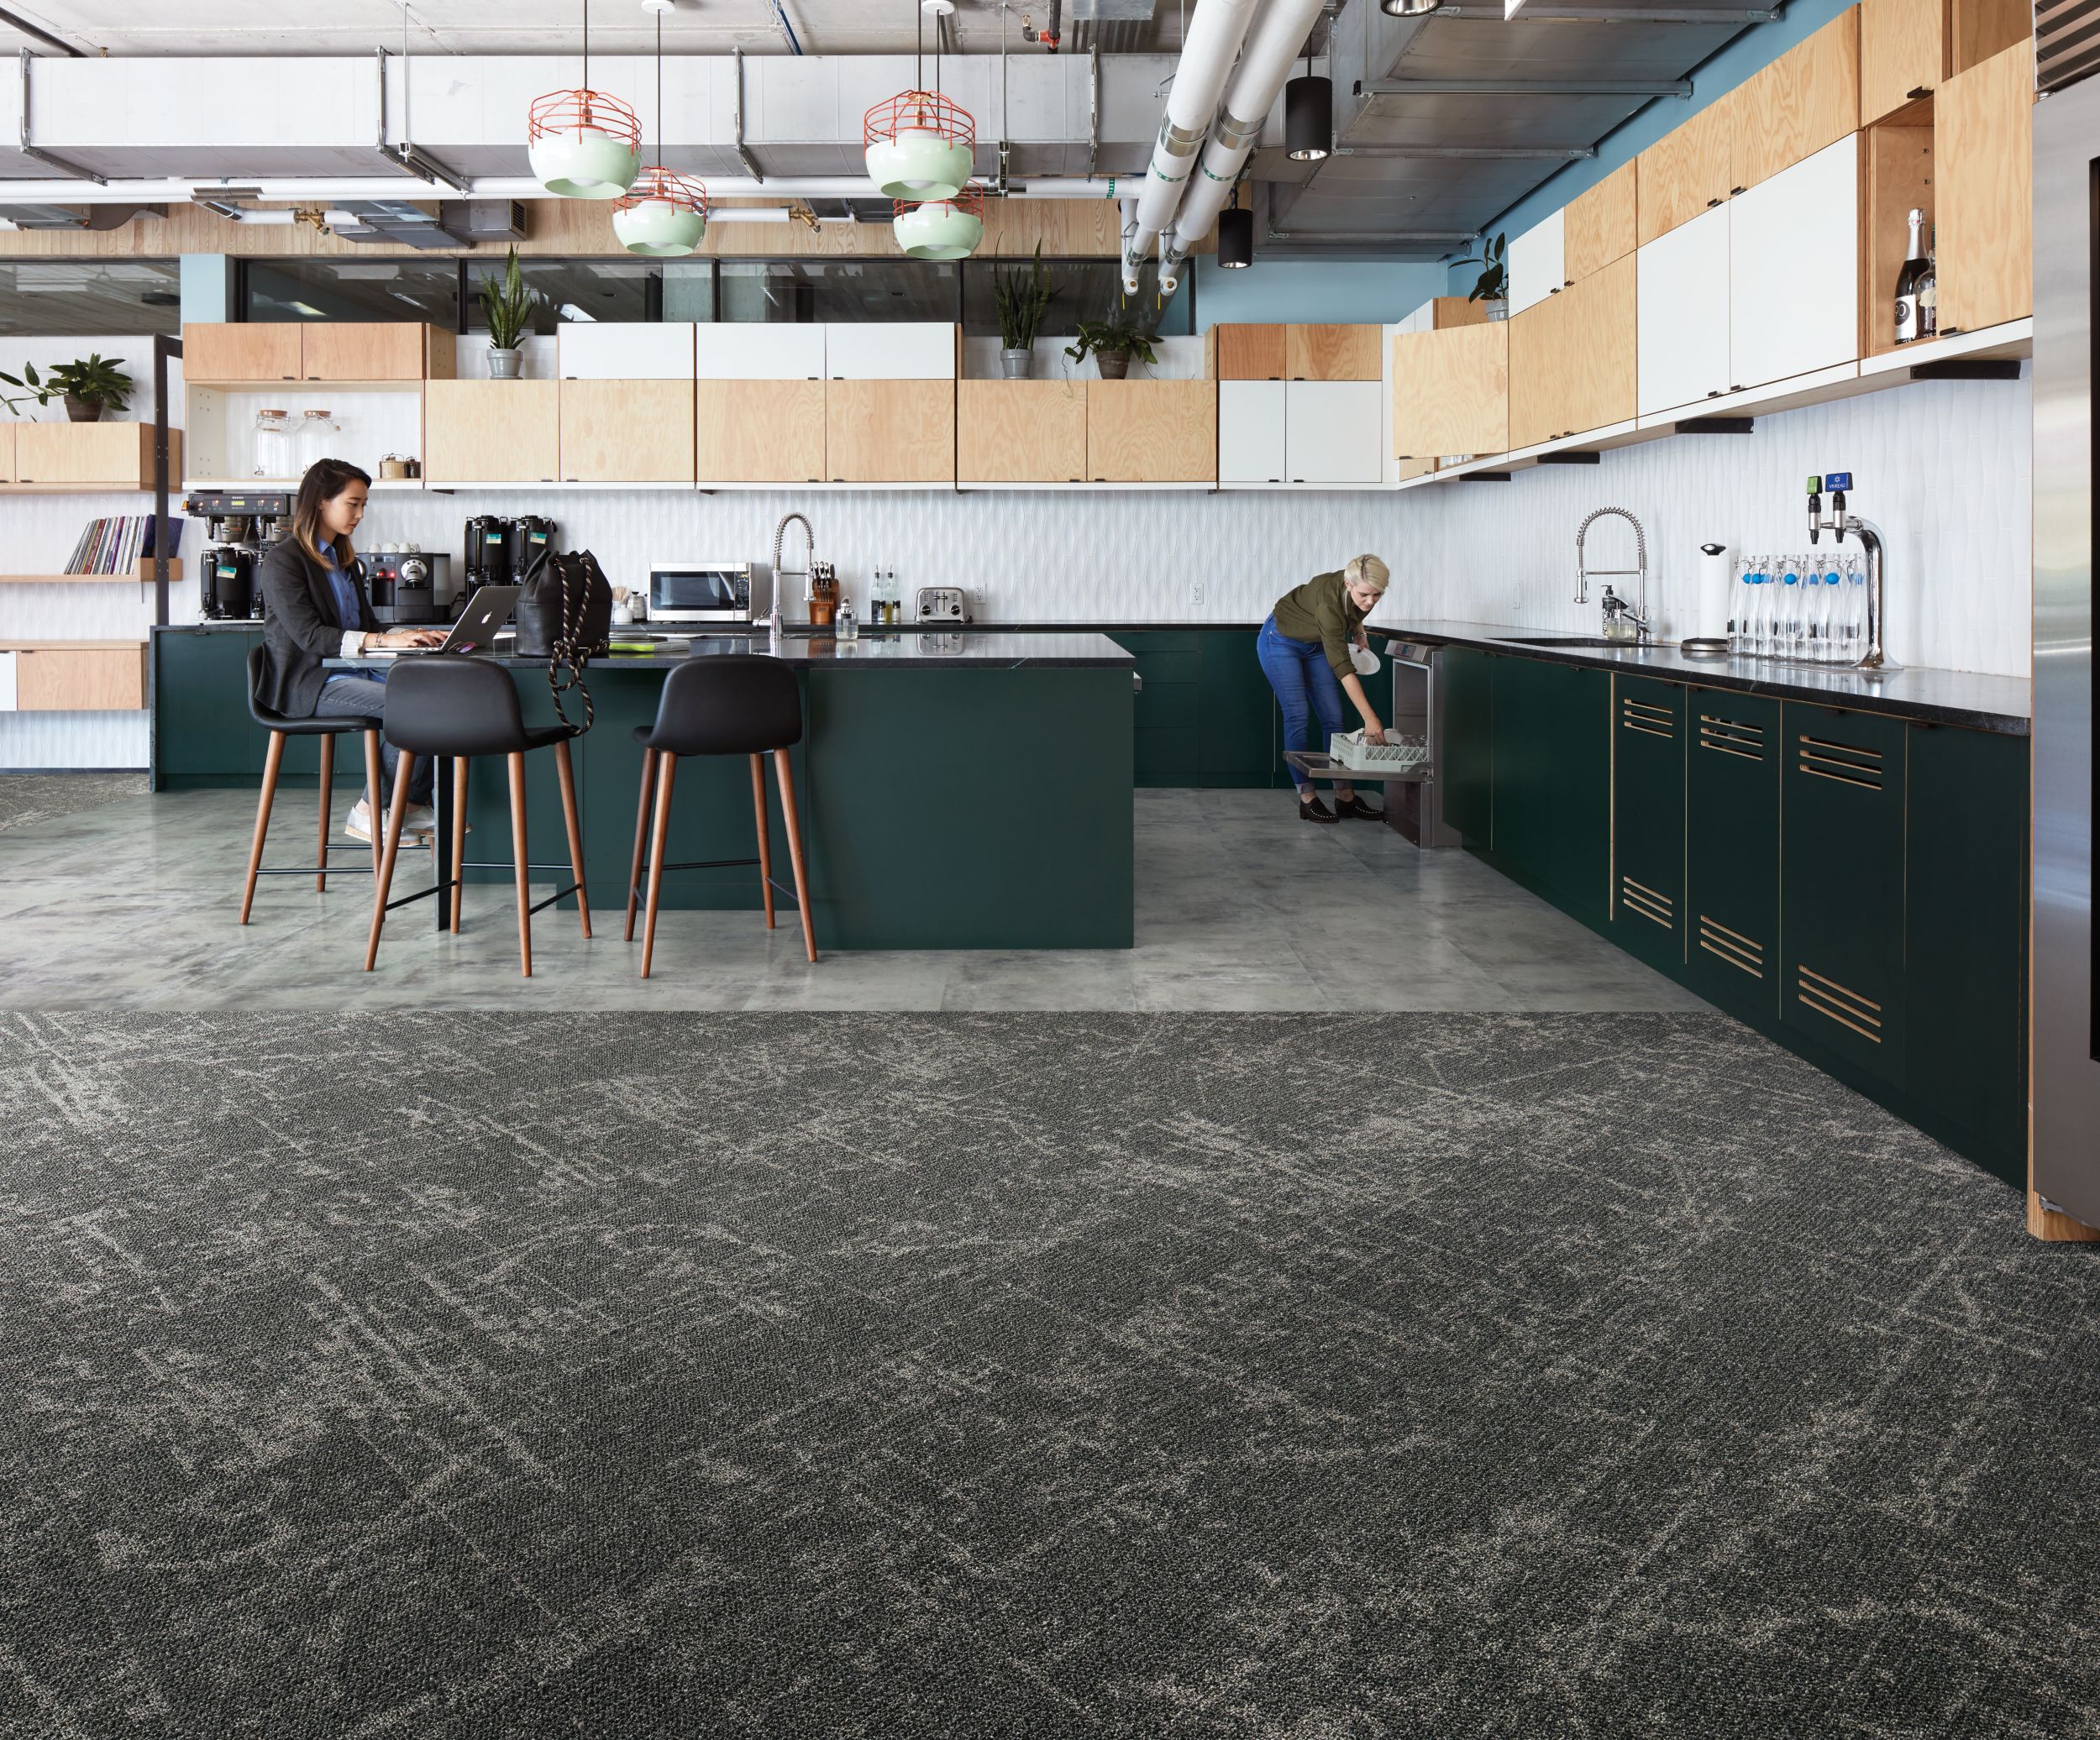 Interface Ice Breaker carpet tile and Textured Stones LVT in kitchen area with women lodaing dish washer and women working on computer imagen número 6